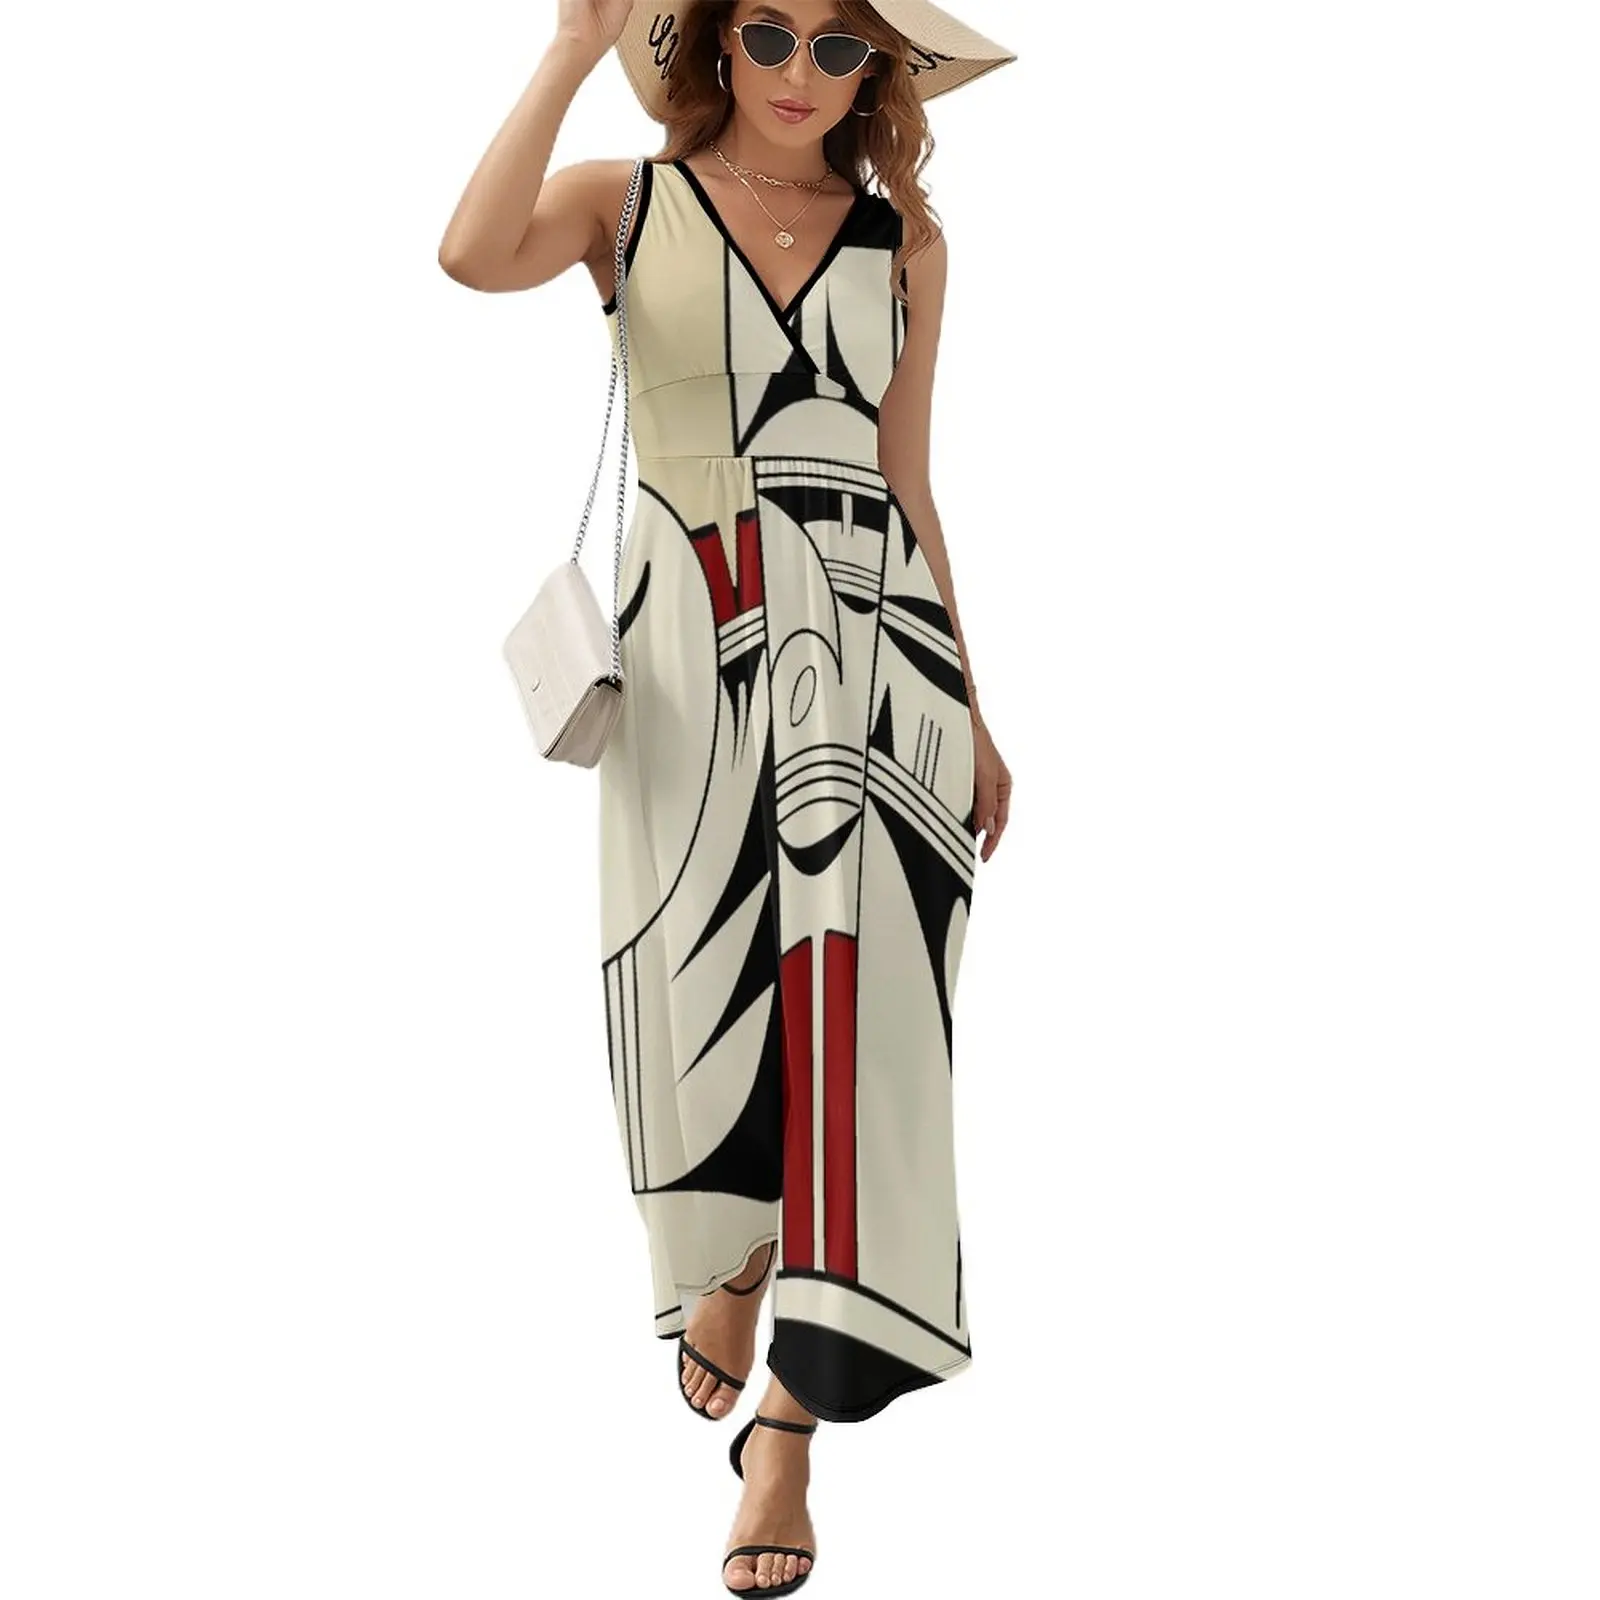 Hopi Pottery Sleeveless Dress ladies dresses for special occasions clothes for woman